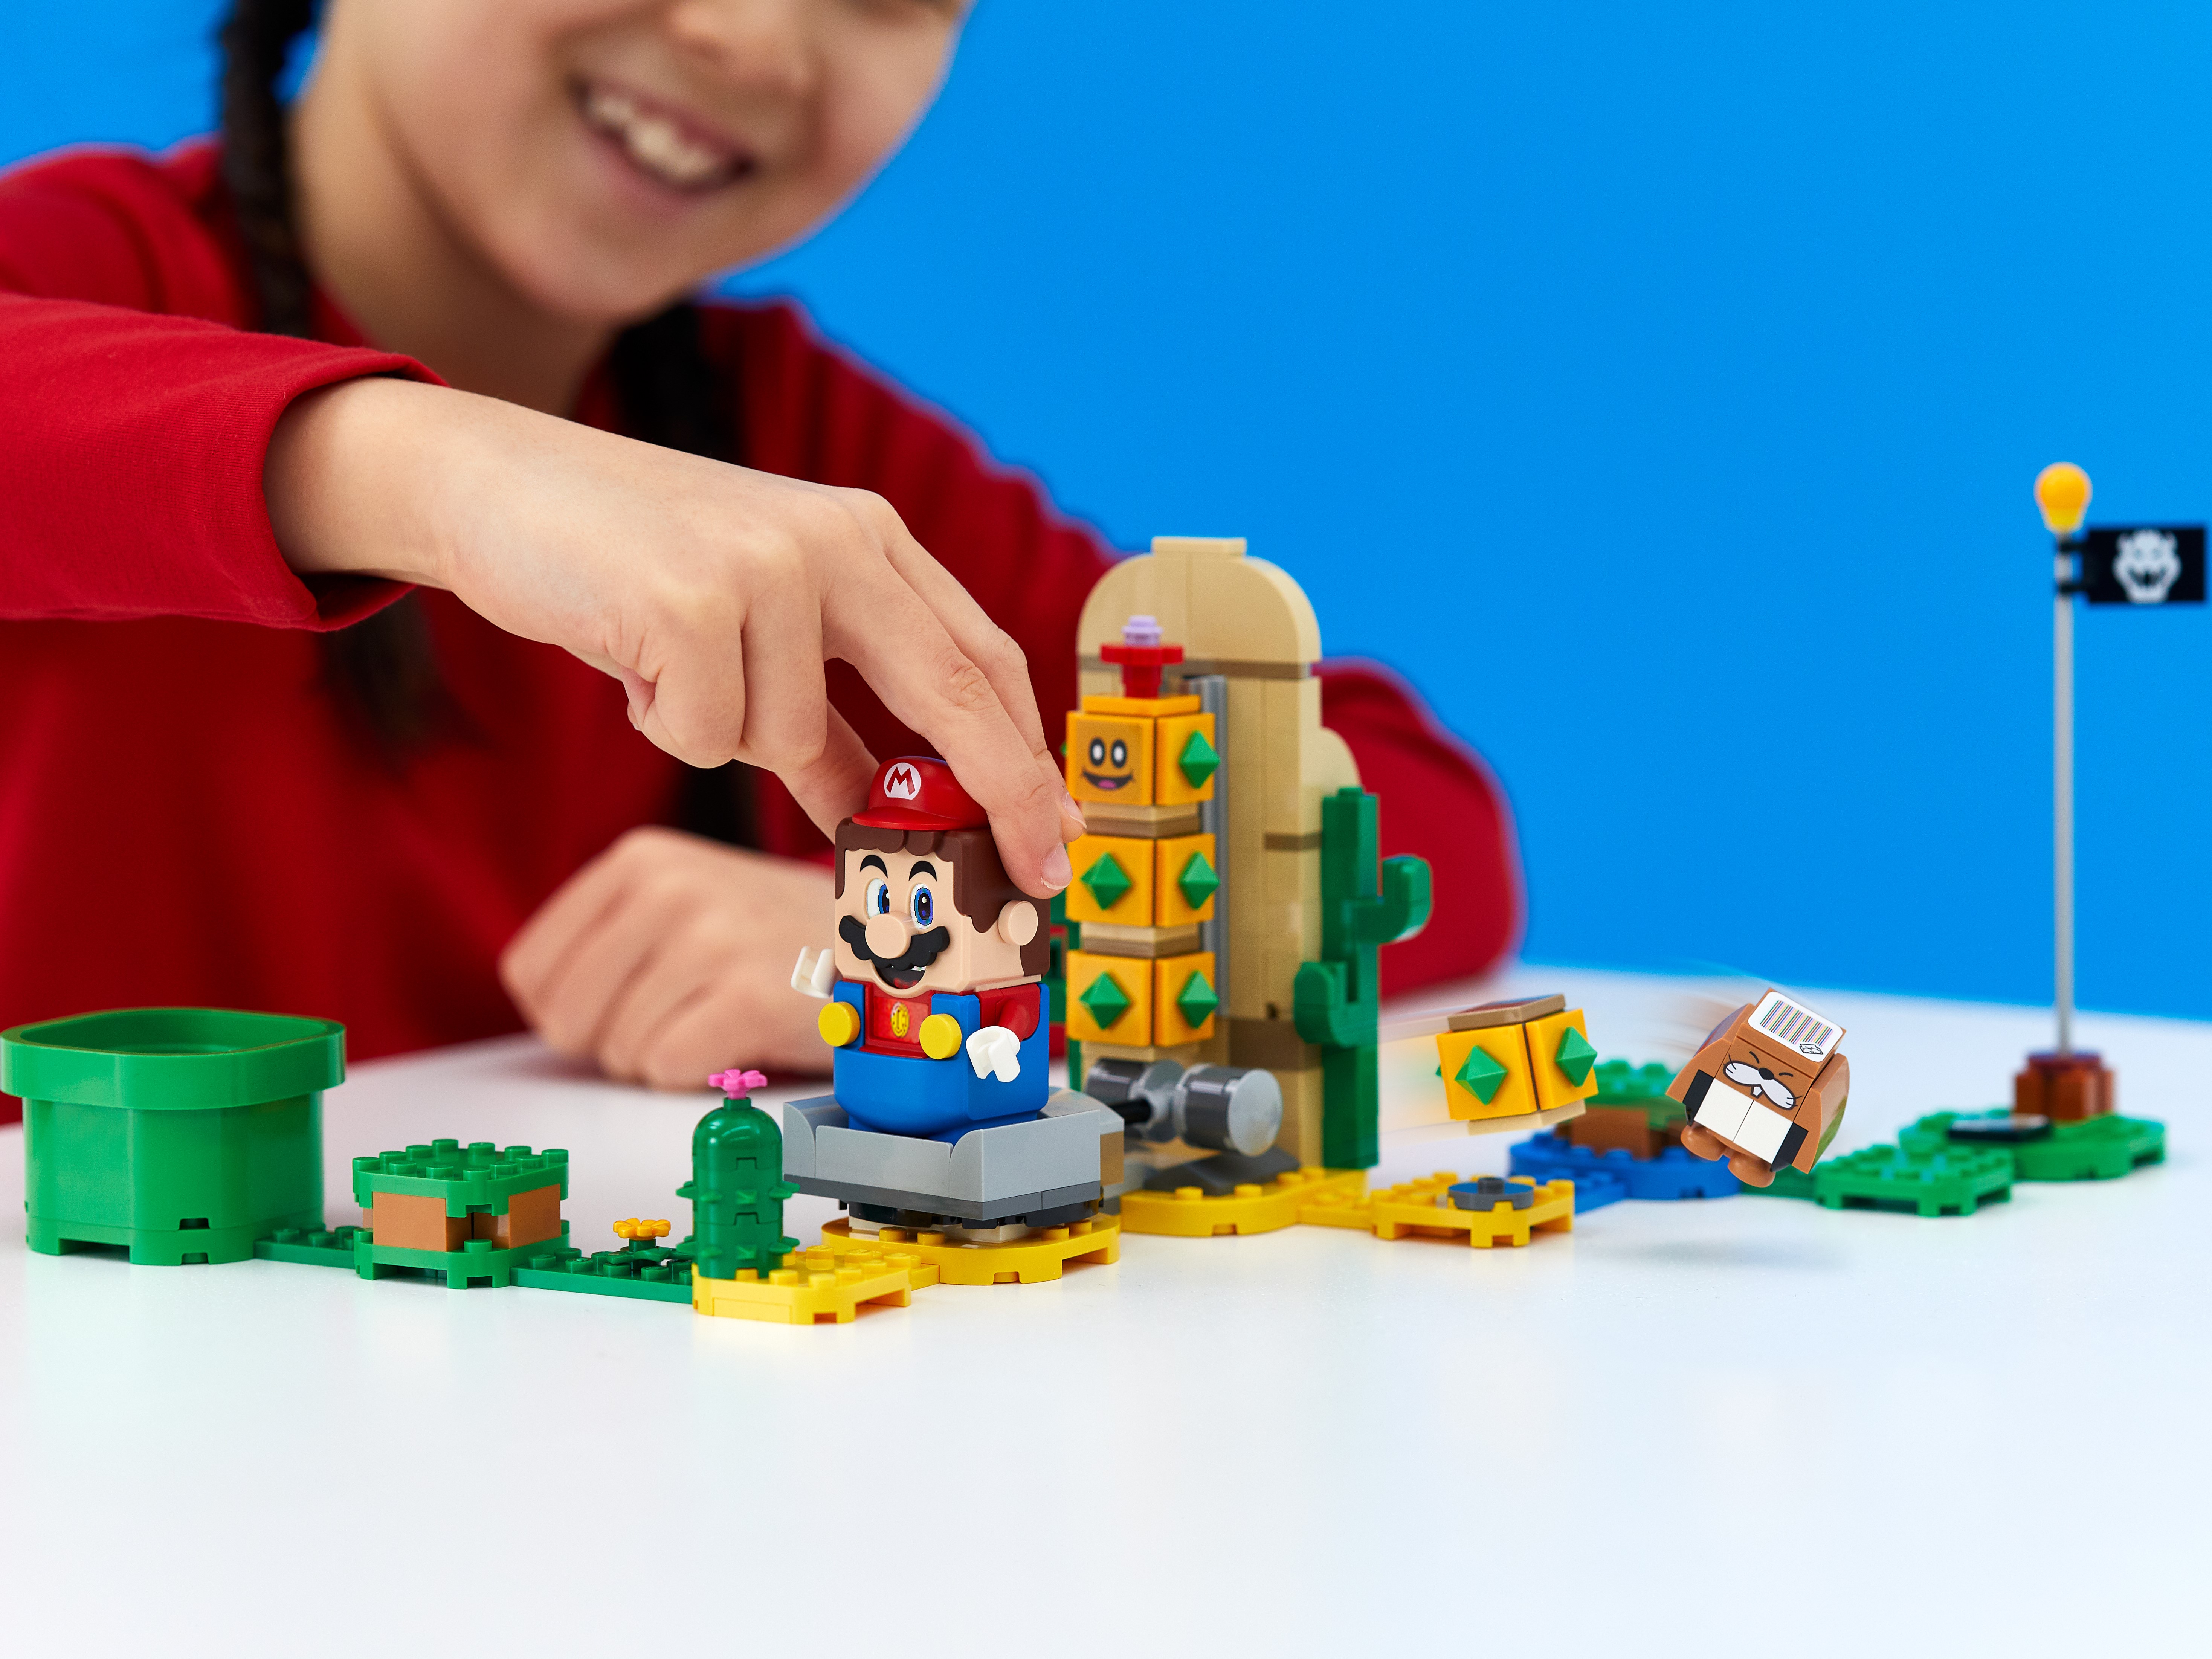 LEGO Super Mario Desert Pokey Expansion Set 71363 Building Kit; Toy for  Creative Kids to Combine with The Super Mario Adventures with Mario Starter